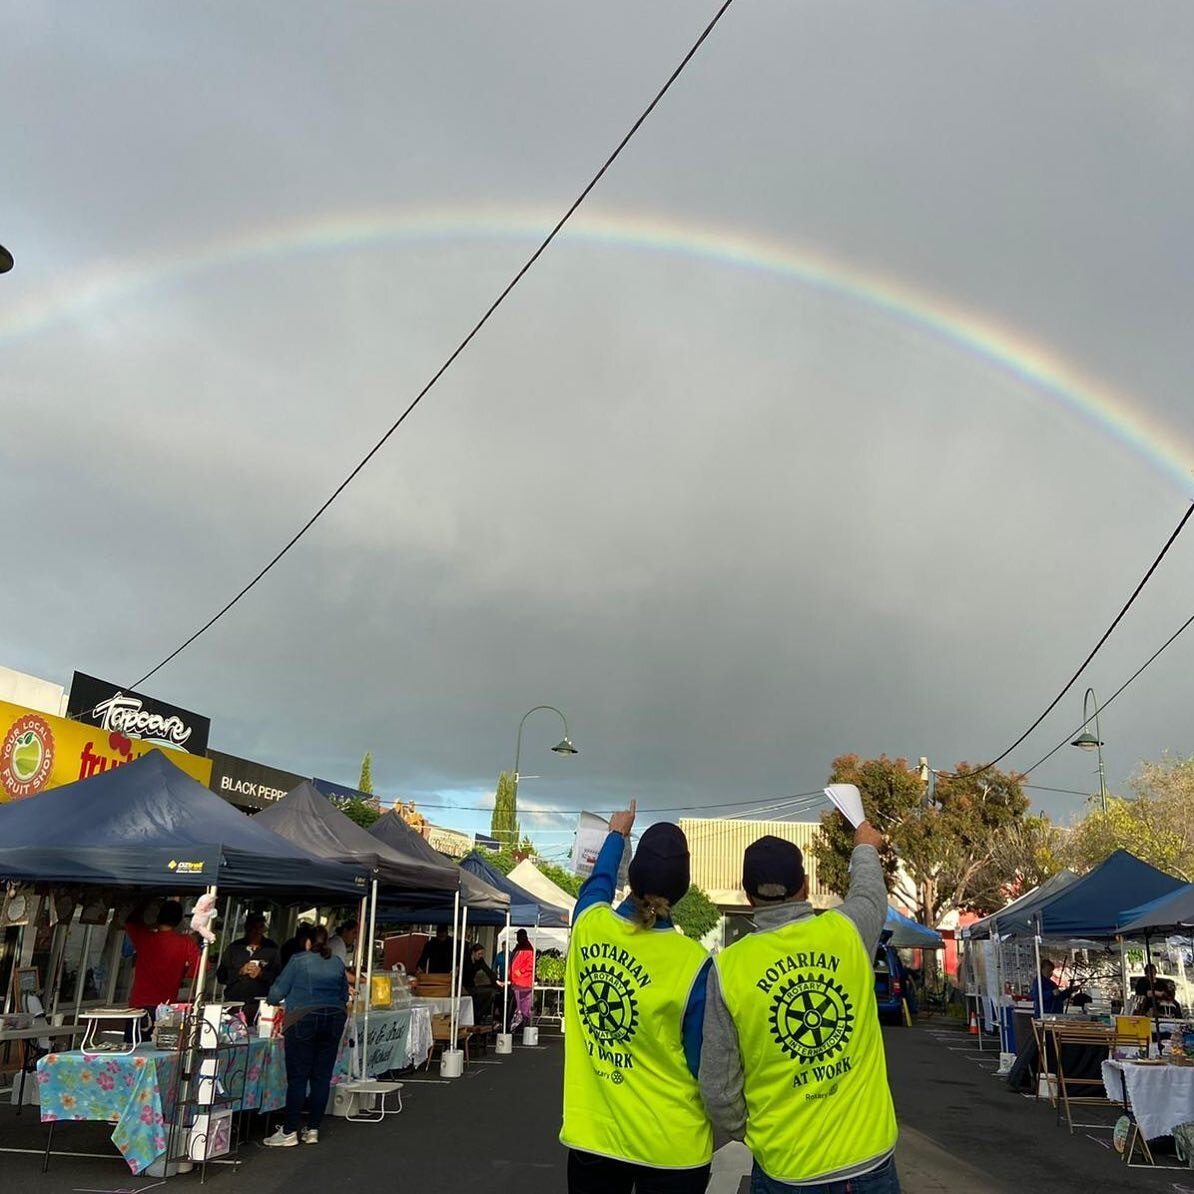 After a super wet Saturday in Melbourne, we were thrilled to be greeted at bump in this morning by this rainbow announcing blue skies ahead #mountwaverleyvillagemarket
.
.
.
.

#mtwaverley mountwaverleymarket #mountwaverley #mtwaverley monash #melbou